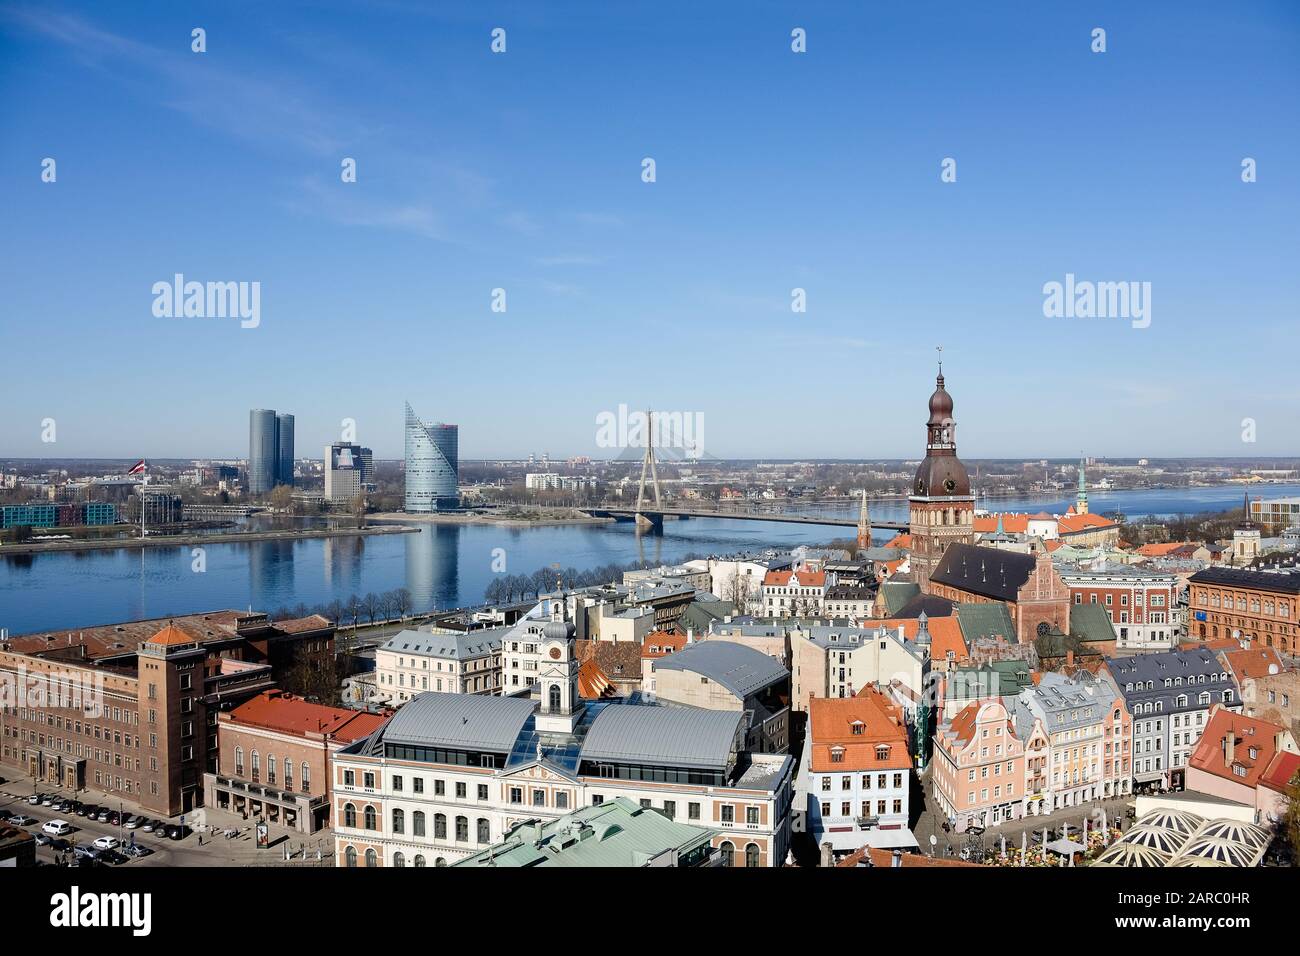 View over Riga in Latvia with buildings and river Stock Photo